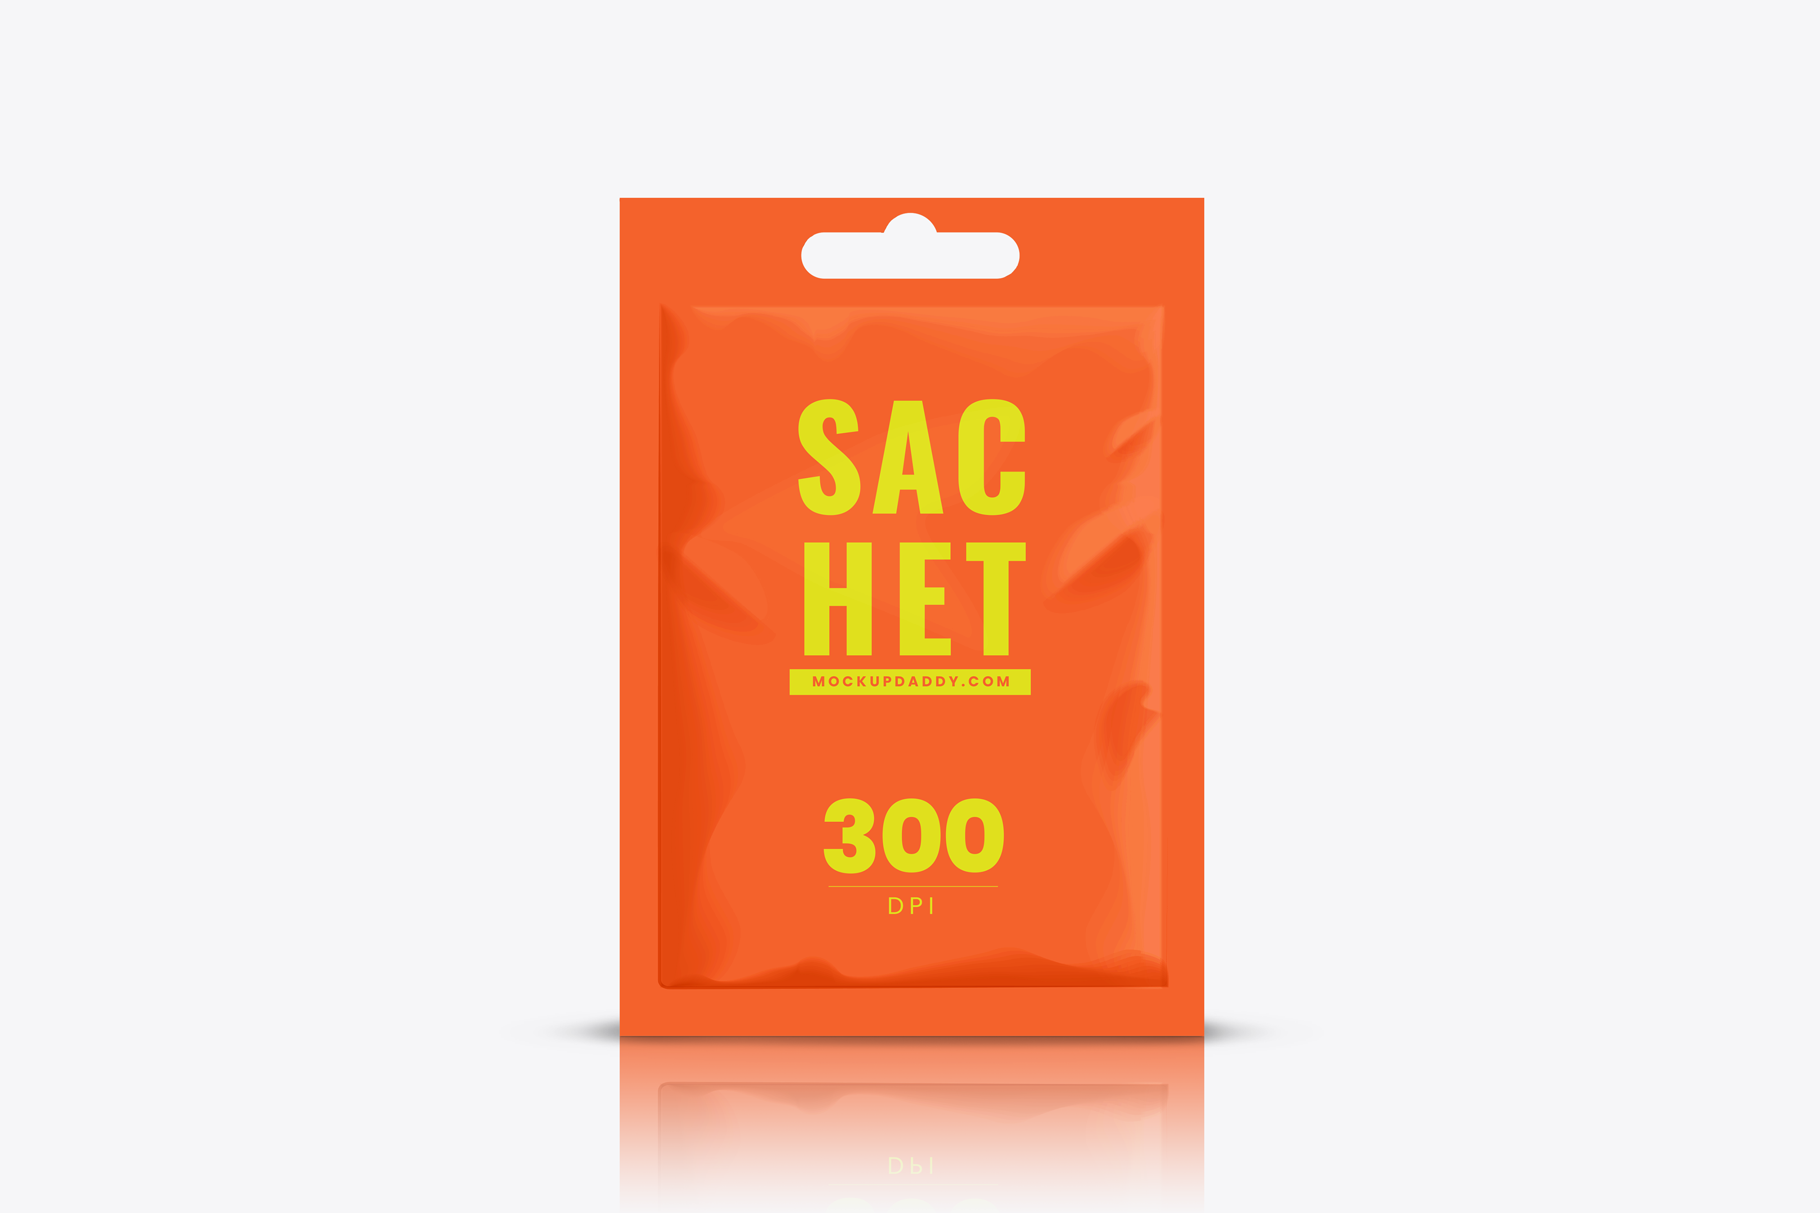 Orange pouch with yellow text mockup on white background.